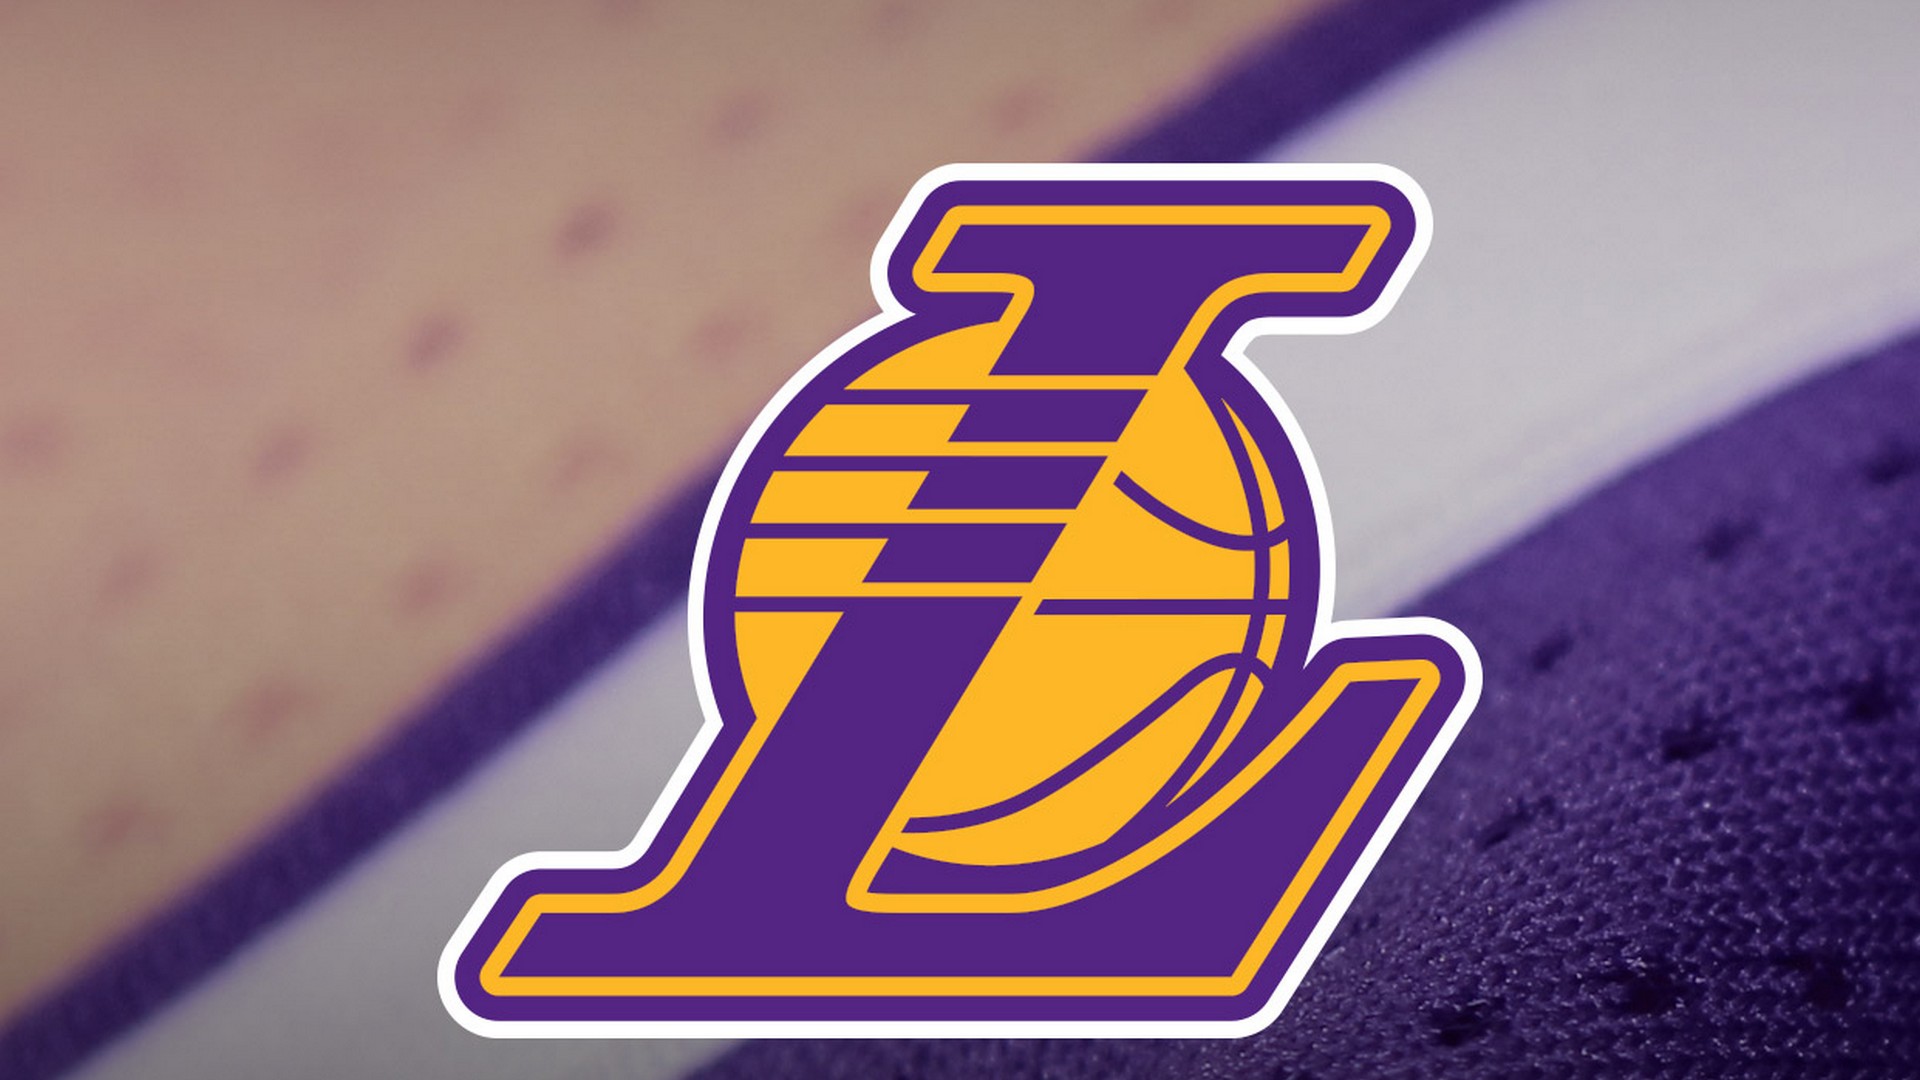 Los Angeles Lakers Backgrounds HD with image dimensions 1920x1080 pixel. You can make this wallpaper for your Desktop Computer Backgrounds, Windows or Mac Screensavers, iPhone Lock screen, Tablet or Android and another Mobile Phone device